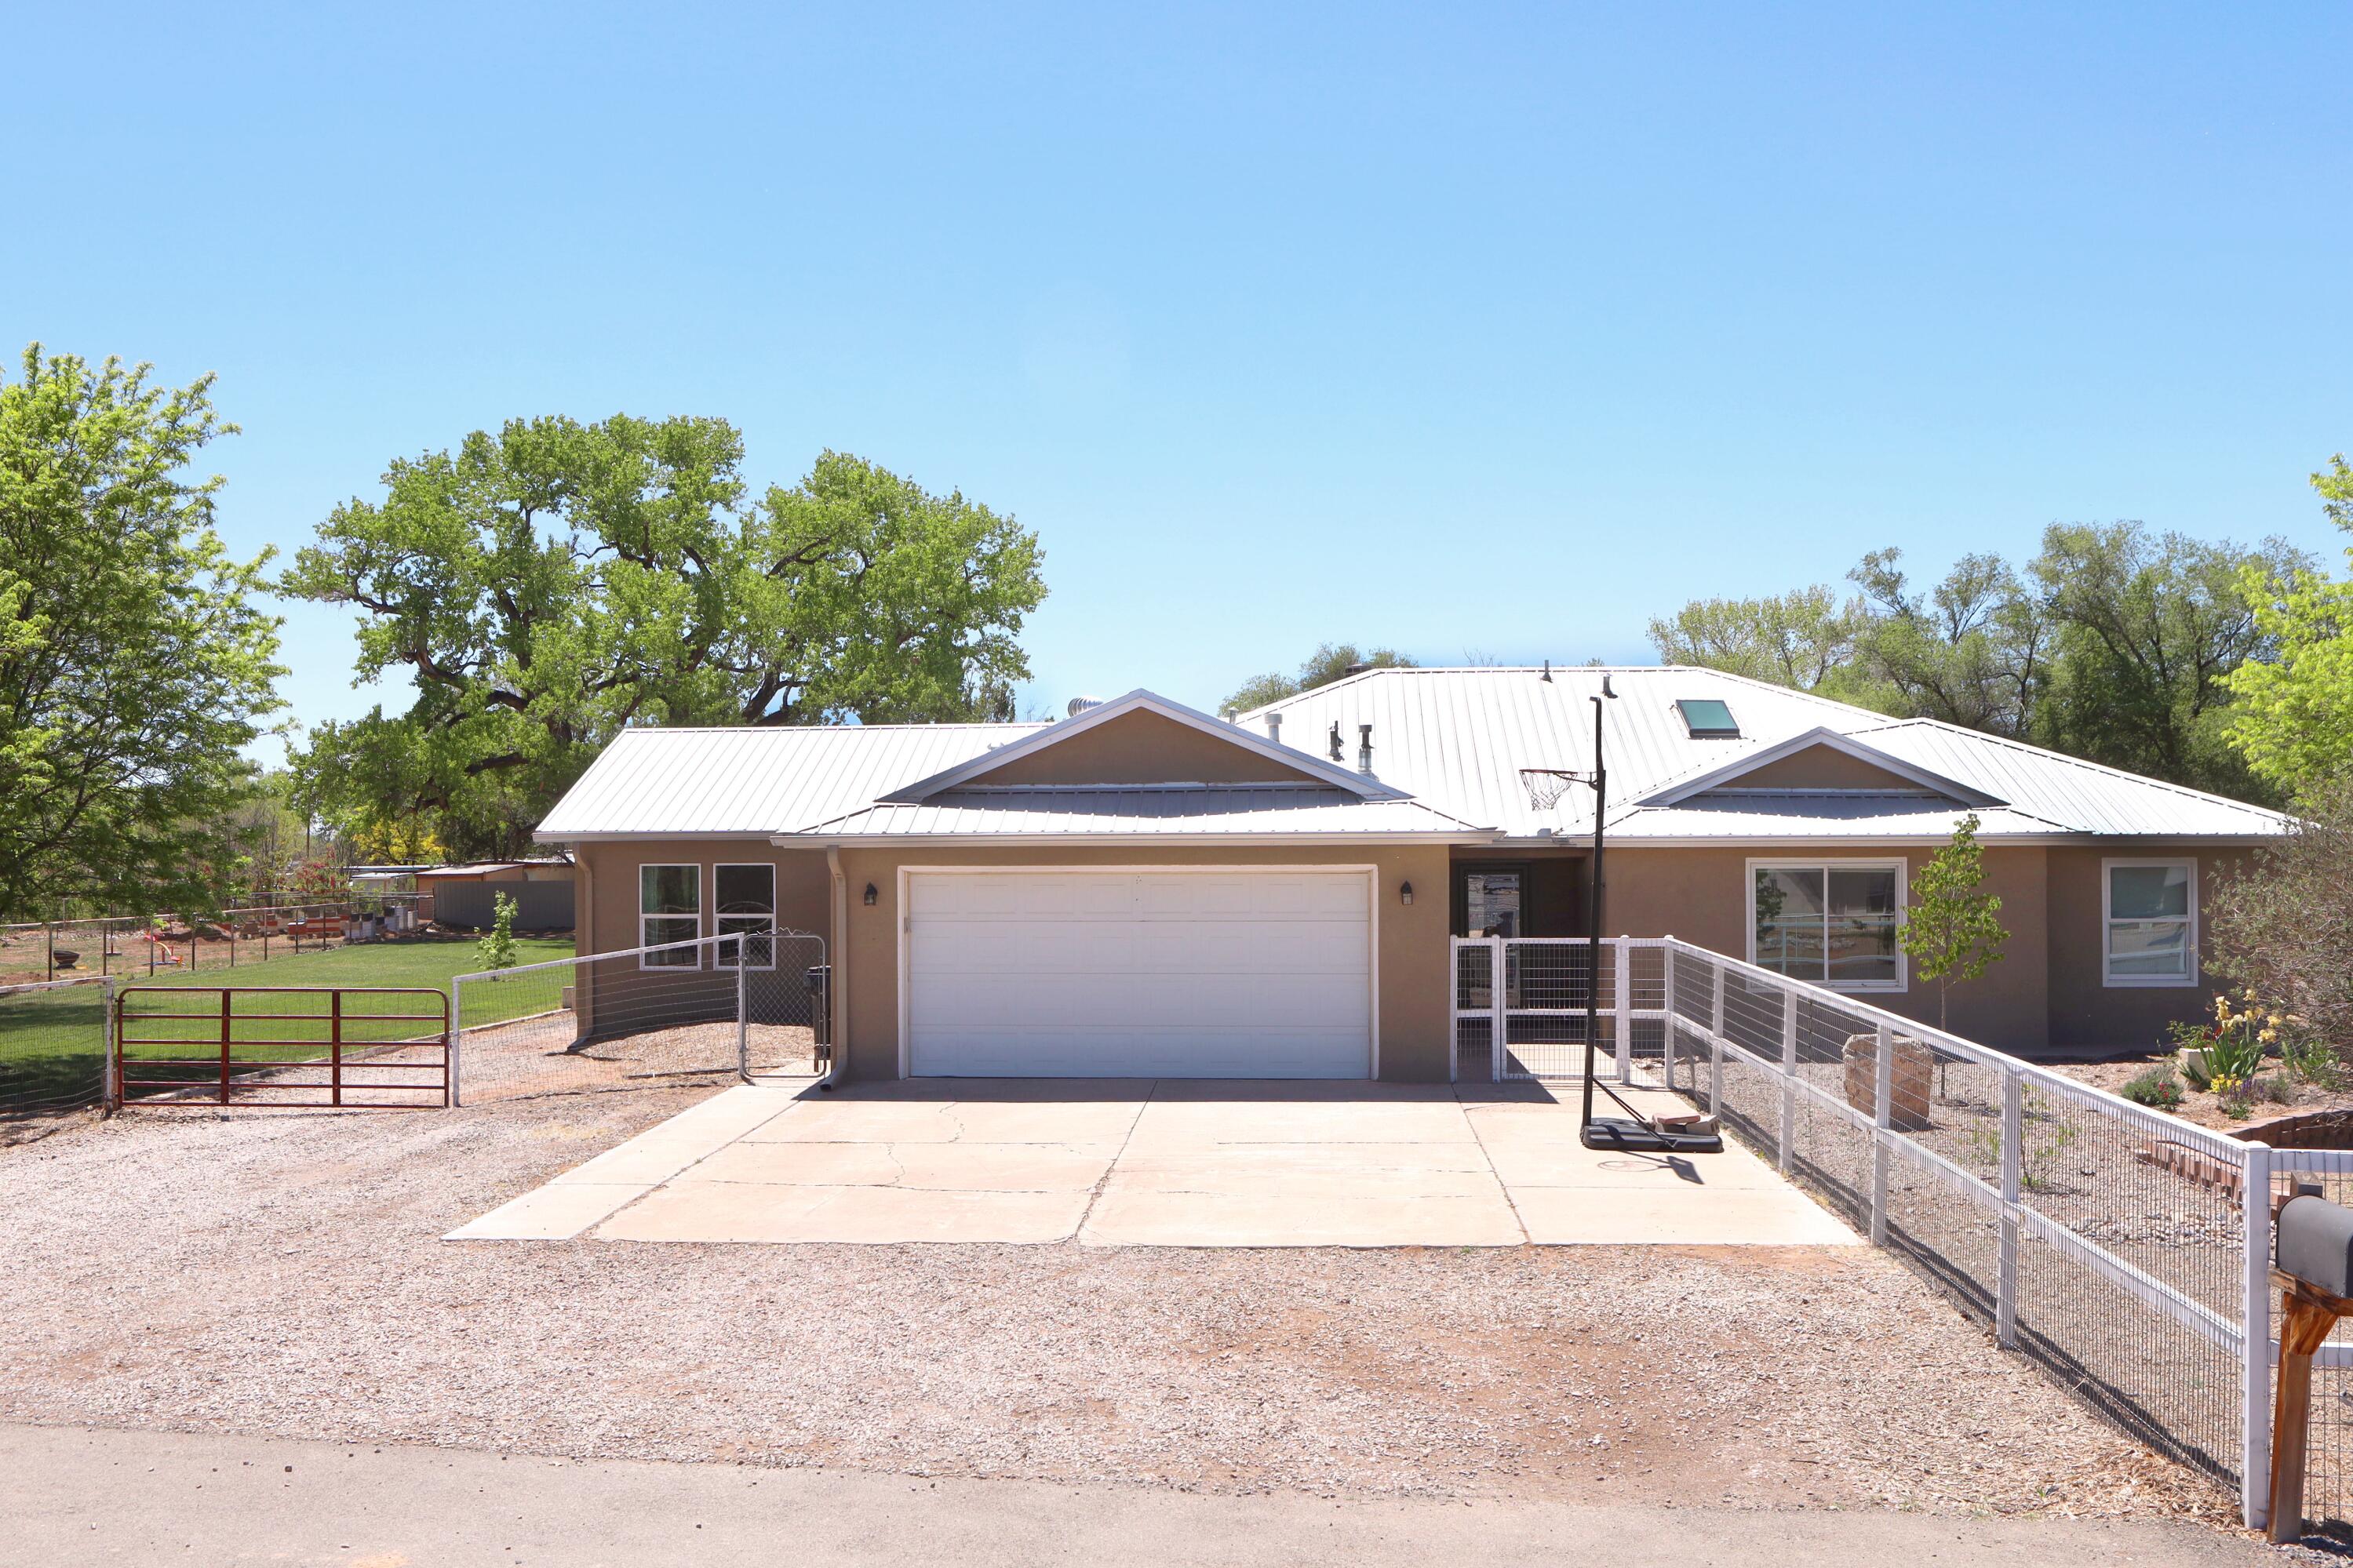 24 Chaparral Lane, Peralta, New Mexico 87042, 4 Bedrooms Bedrooms, ,2 BathroomsBathrooms,Residential,For Sale,24 Chaparral Lane,1061410